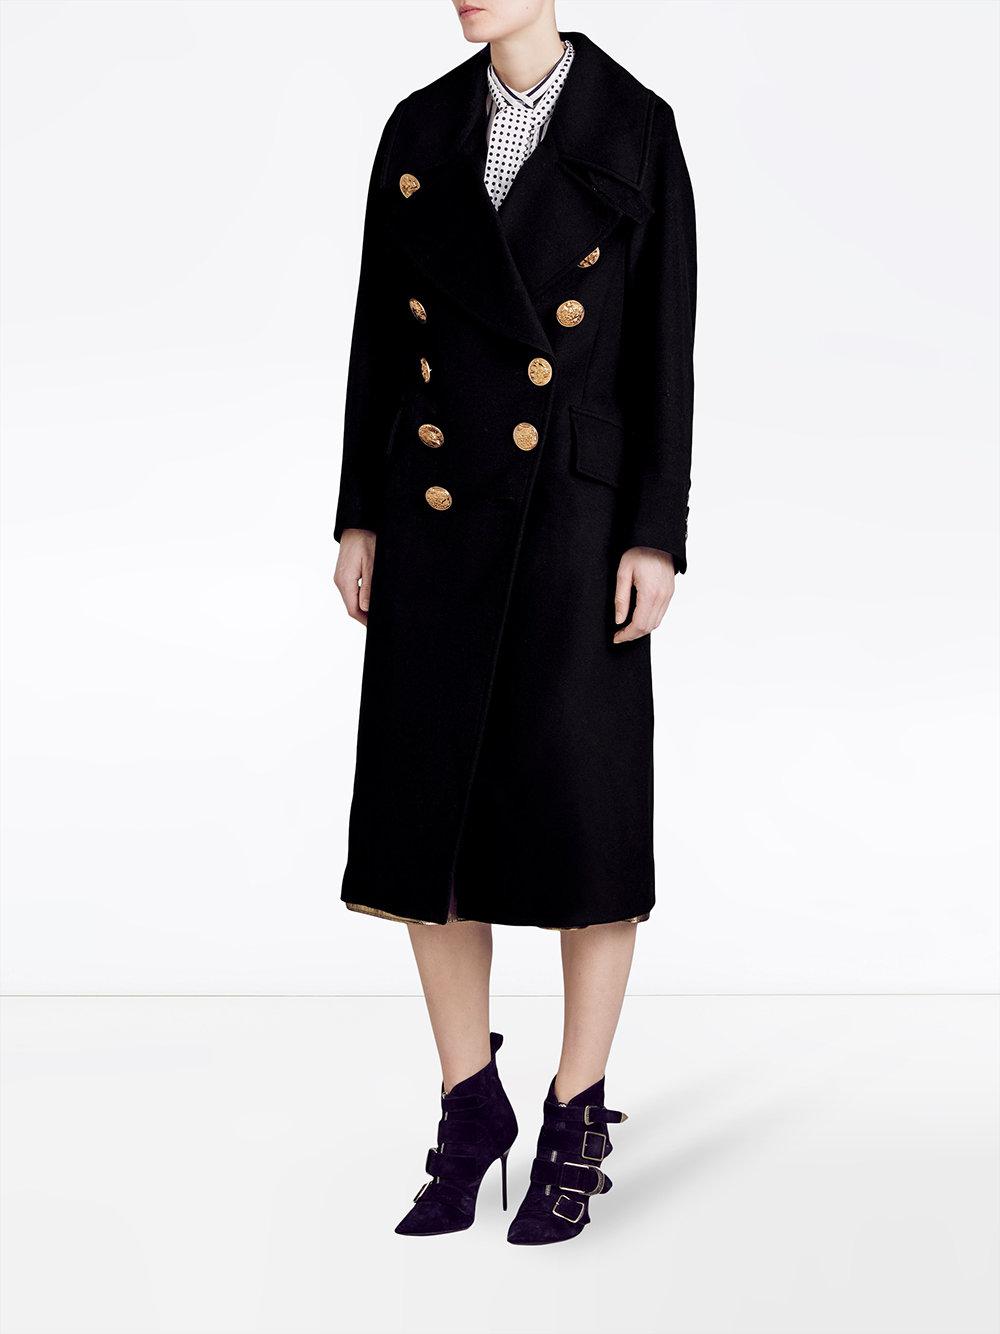 Burberry Bird Button Wool Blend Military Coat in Black - Lyst